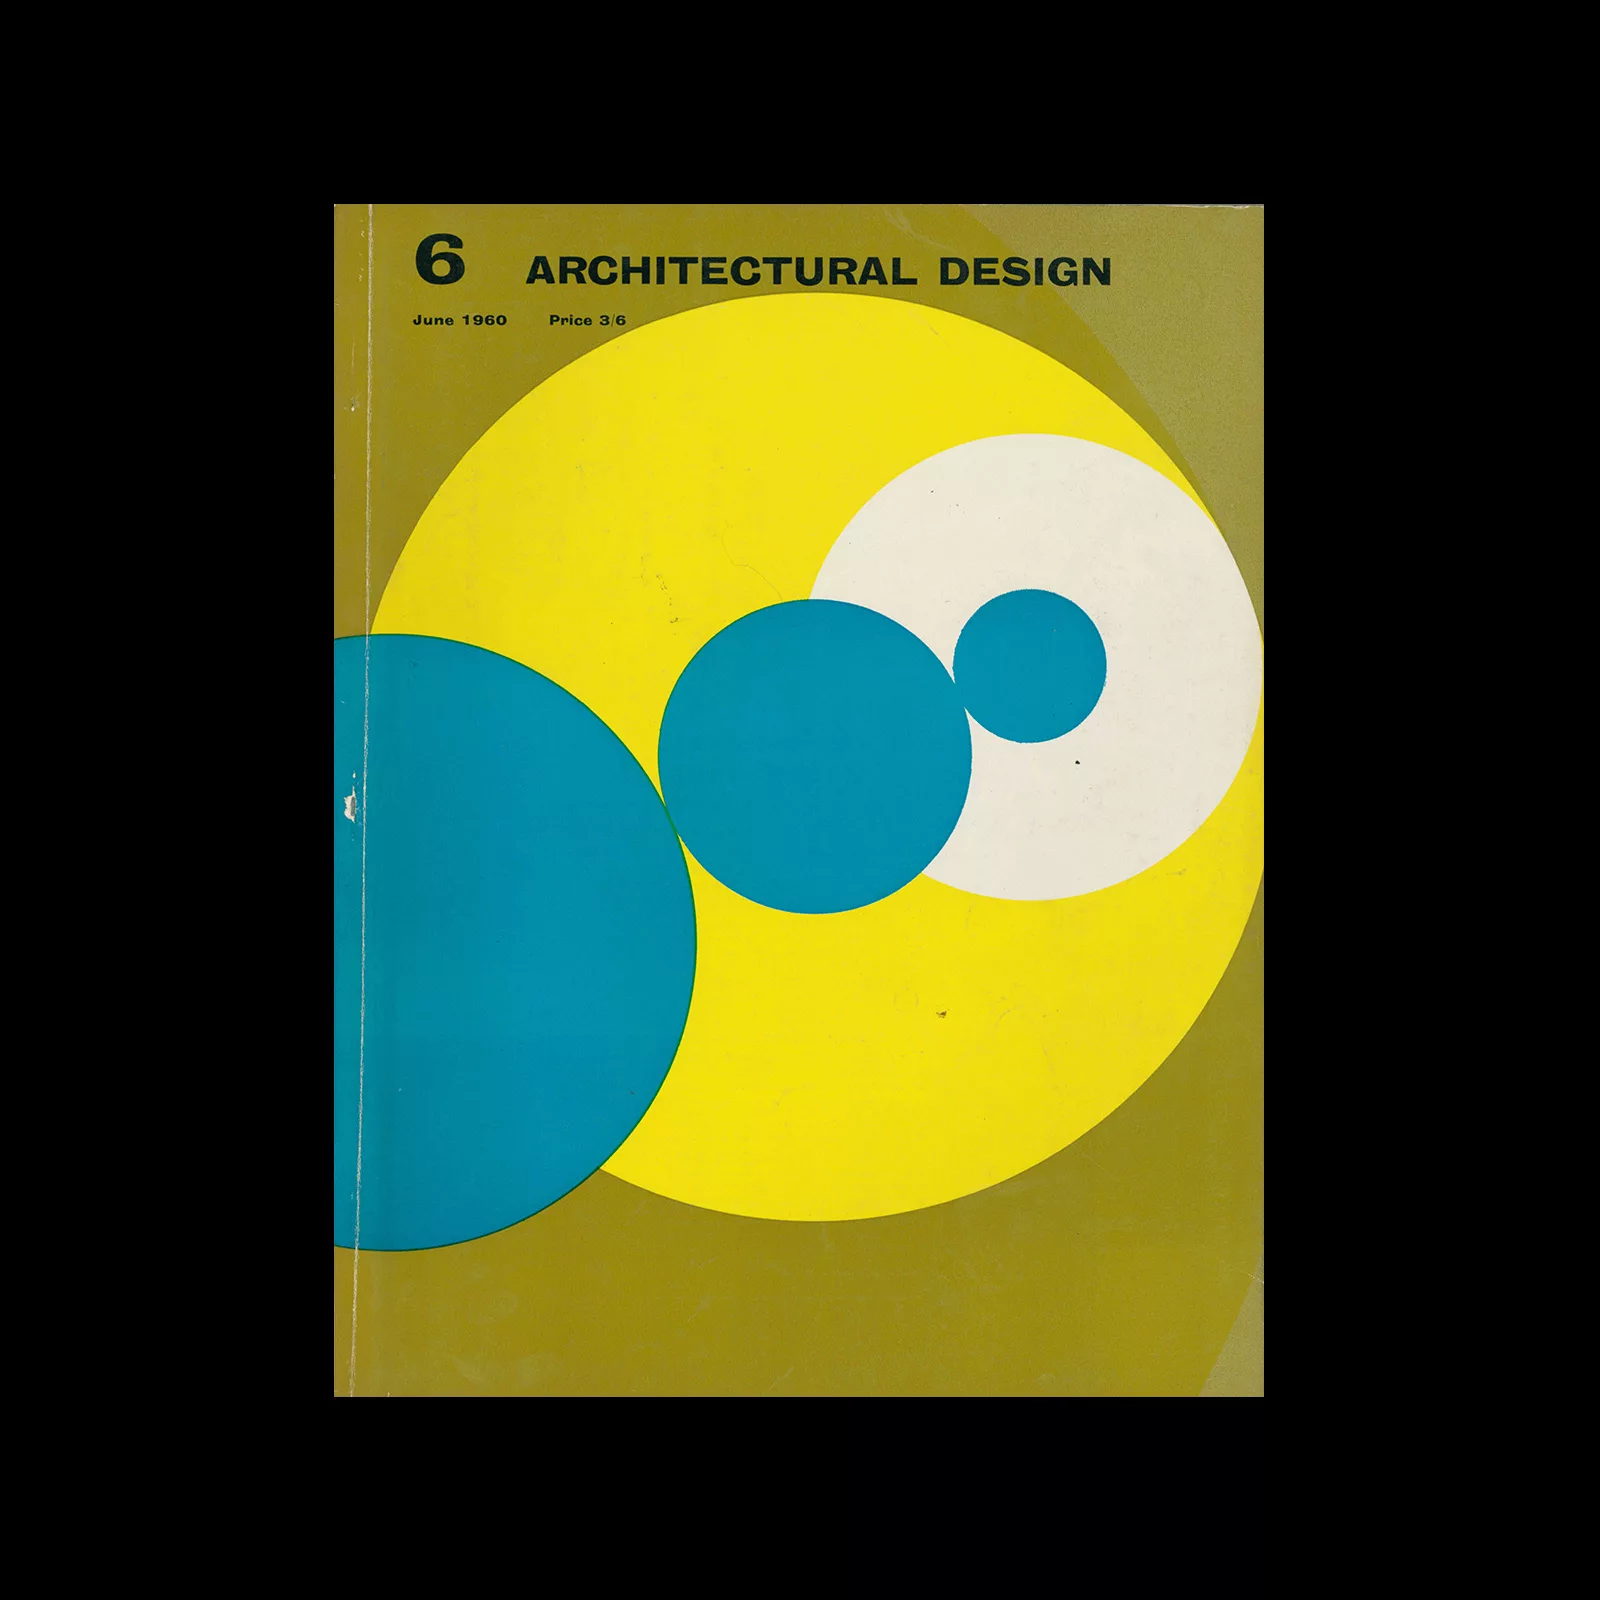 Architectural Design, June 1960. Cover design by Theo Crosby